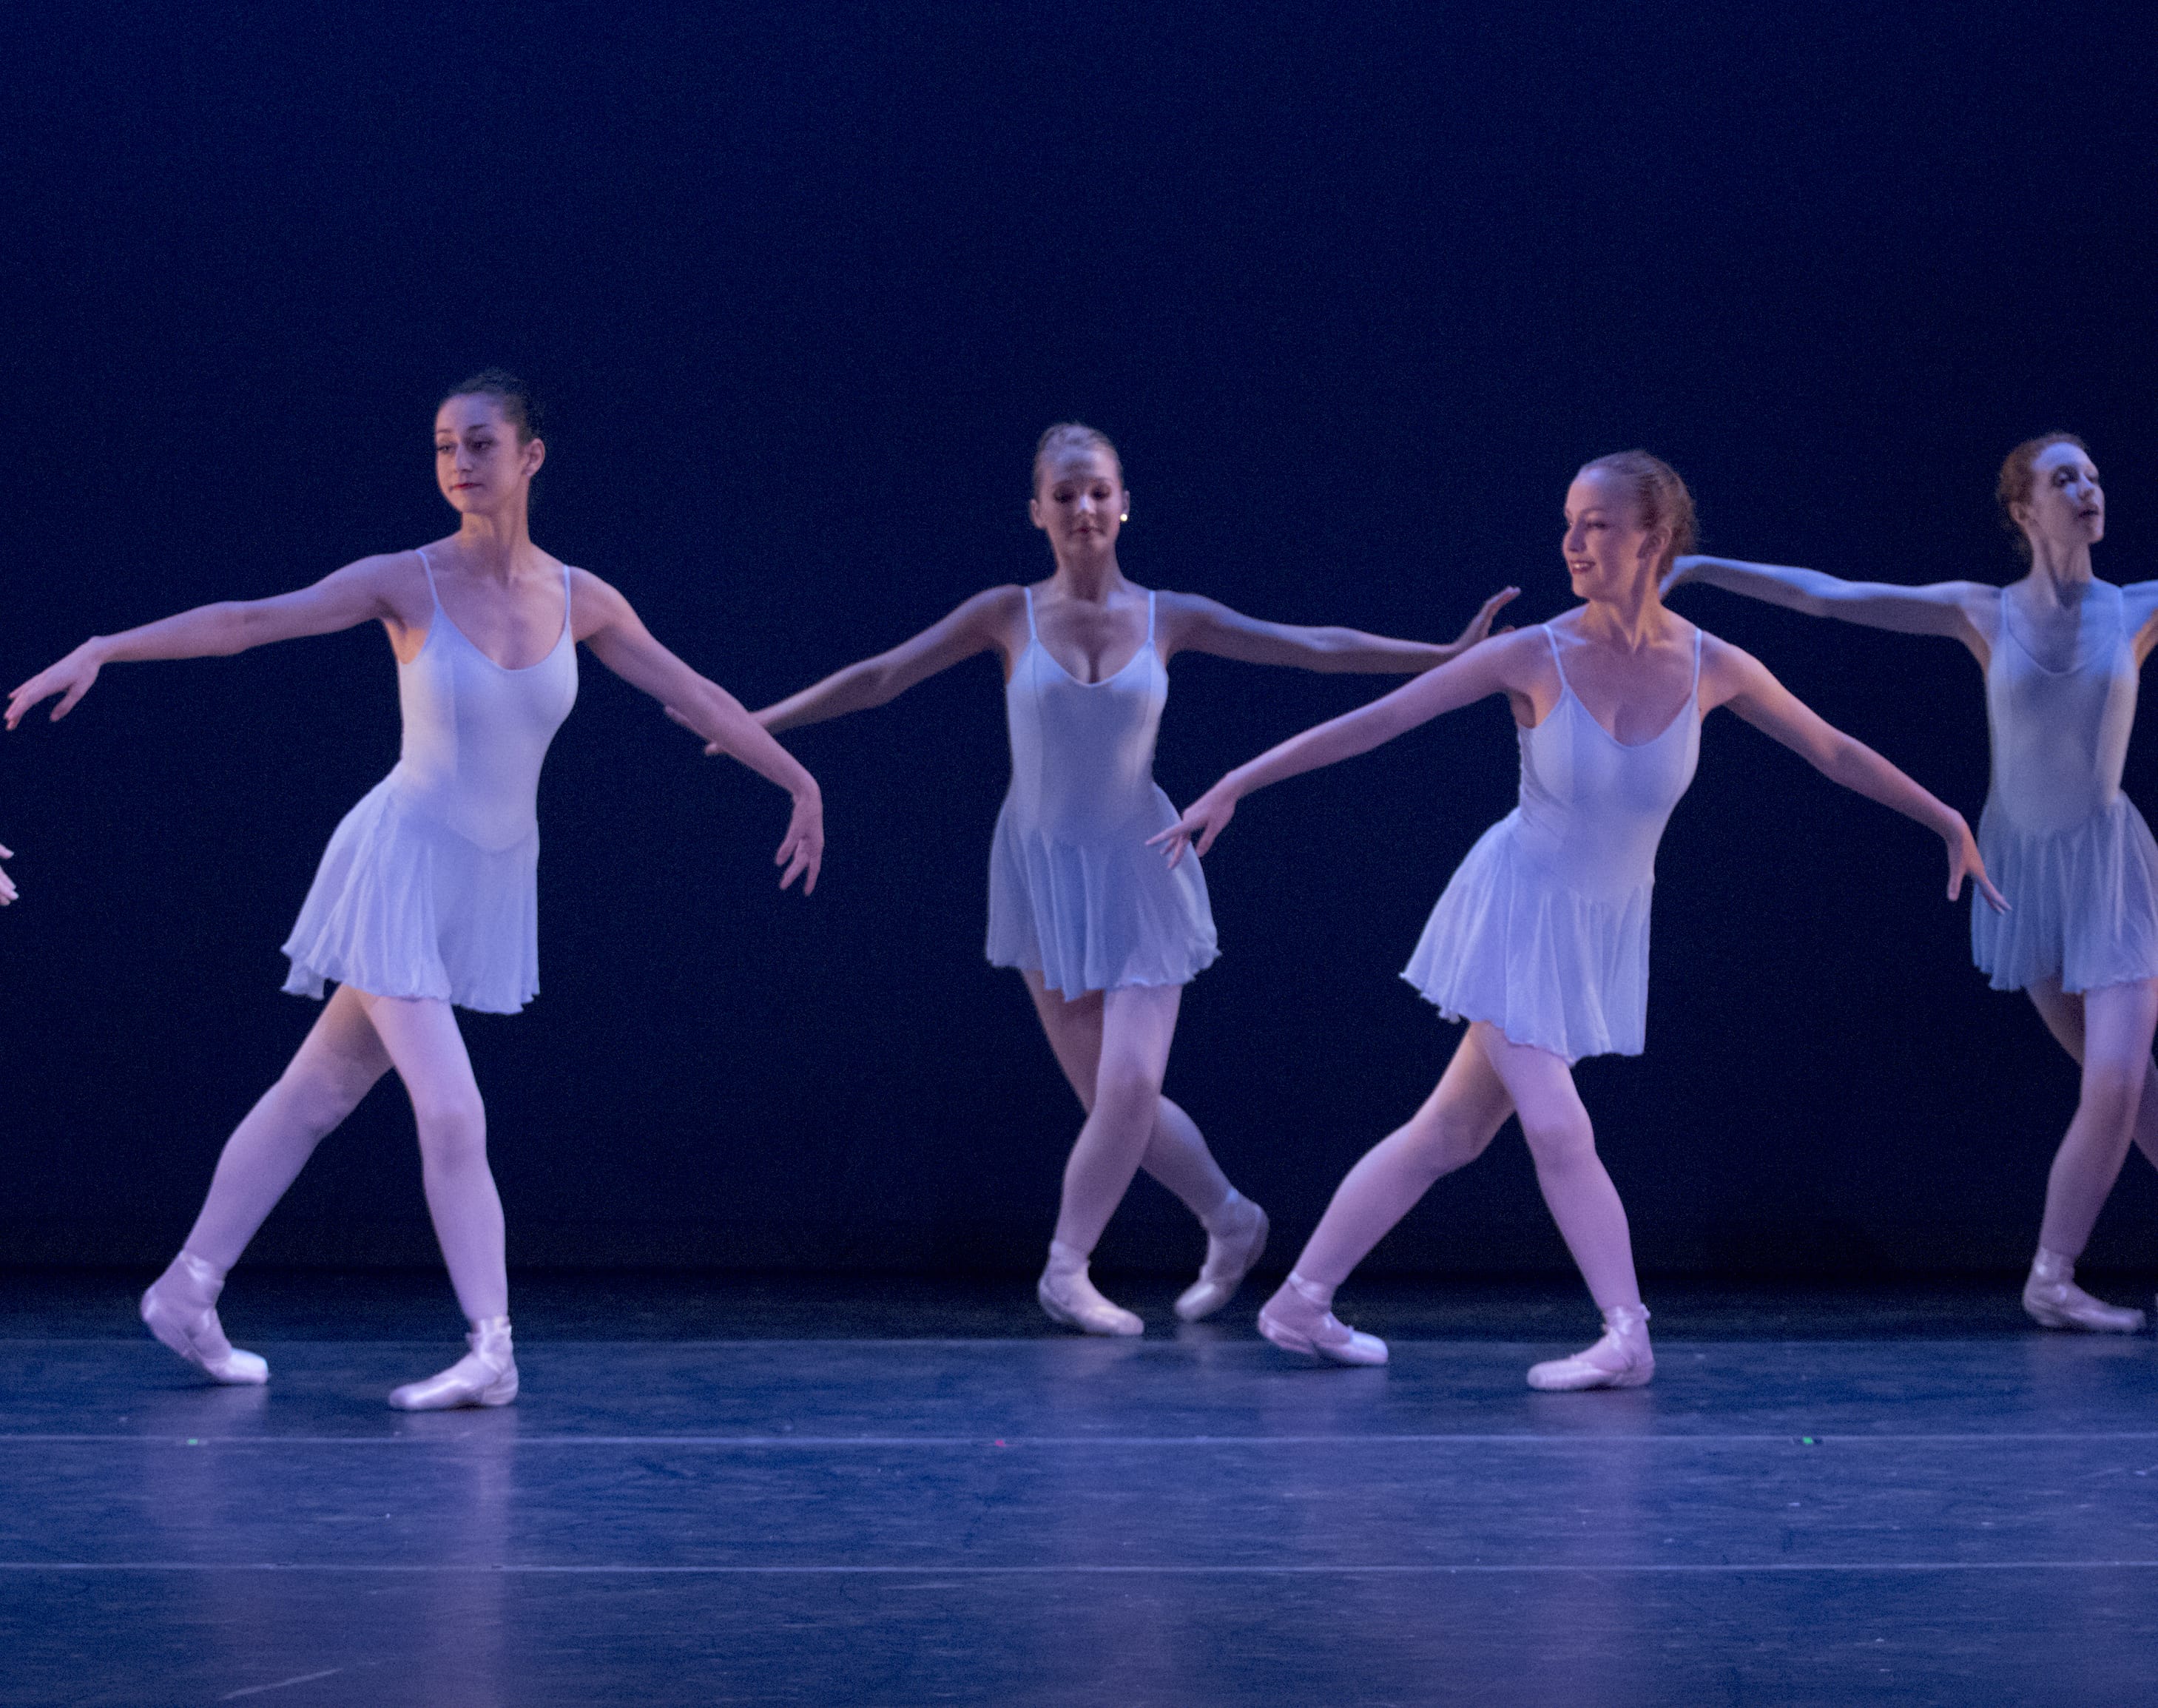 Annie and Hope Garcia (front row) perform during a master's workshop at The Portland Ballet this past August. Both girls enjoy dance for different reasons.